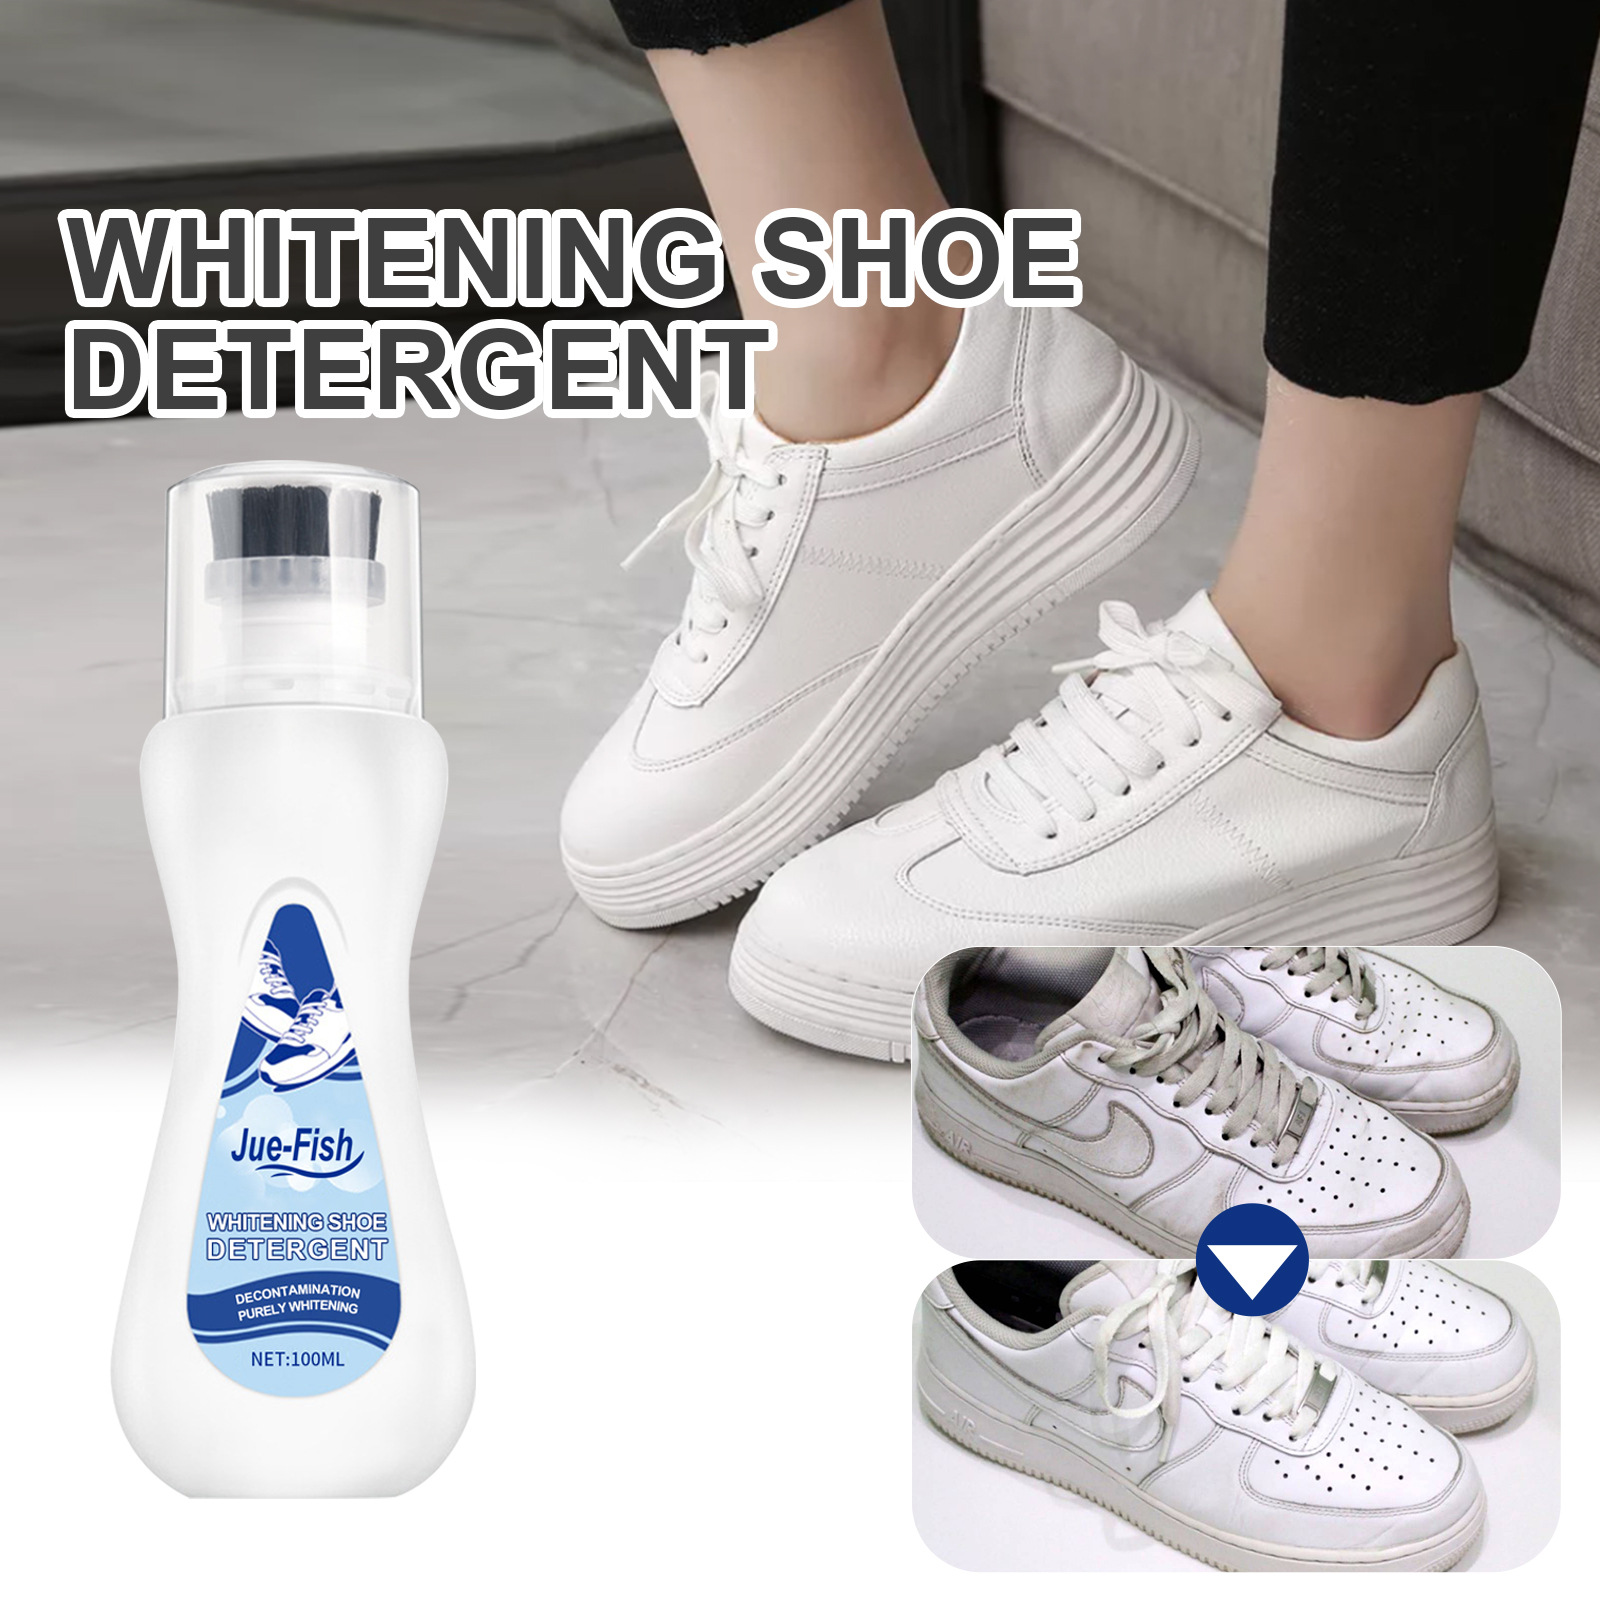 Jue-Fish White Shoes Cleaner White Shoes Cleaning Stains Yellow Edge Bright White Portable Disposable Brightener